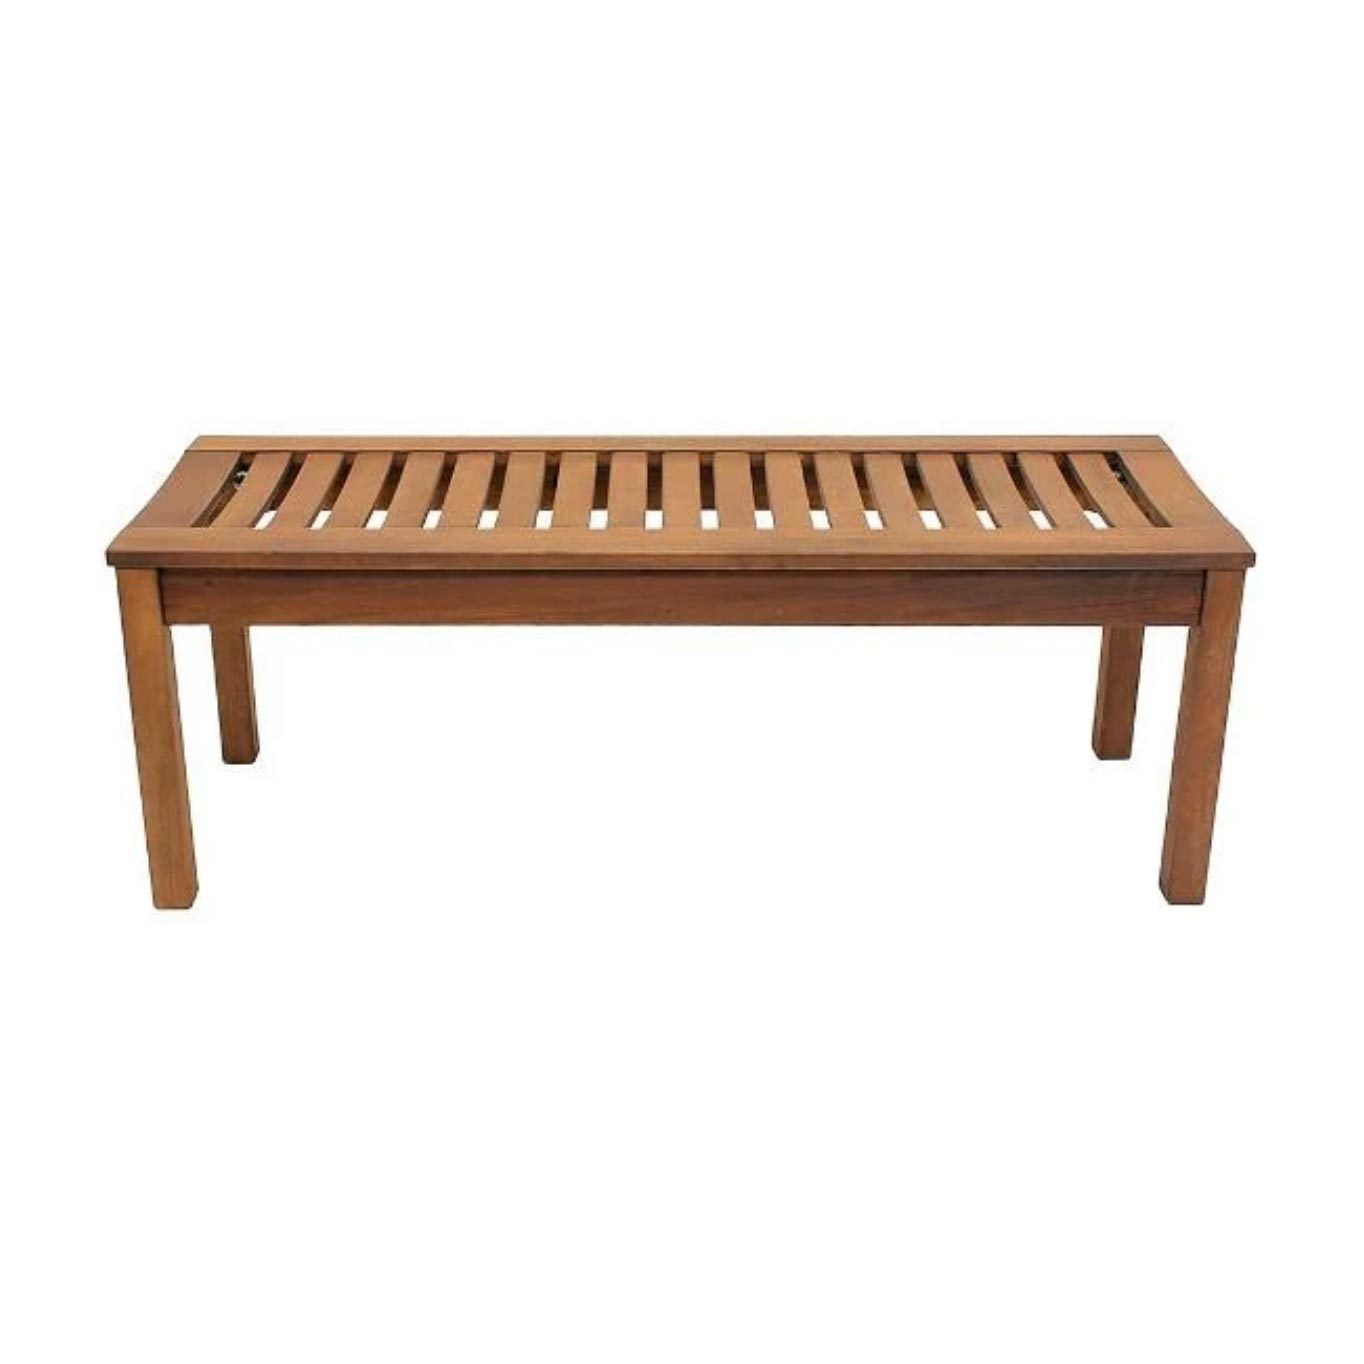 Achla Designs 4-Foot Backless Bench